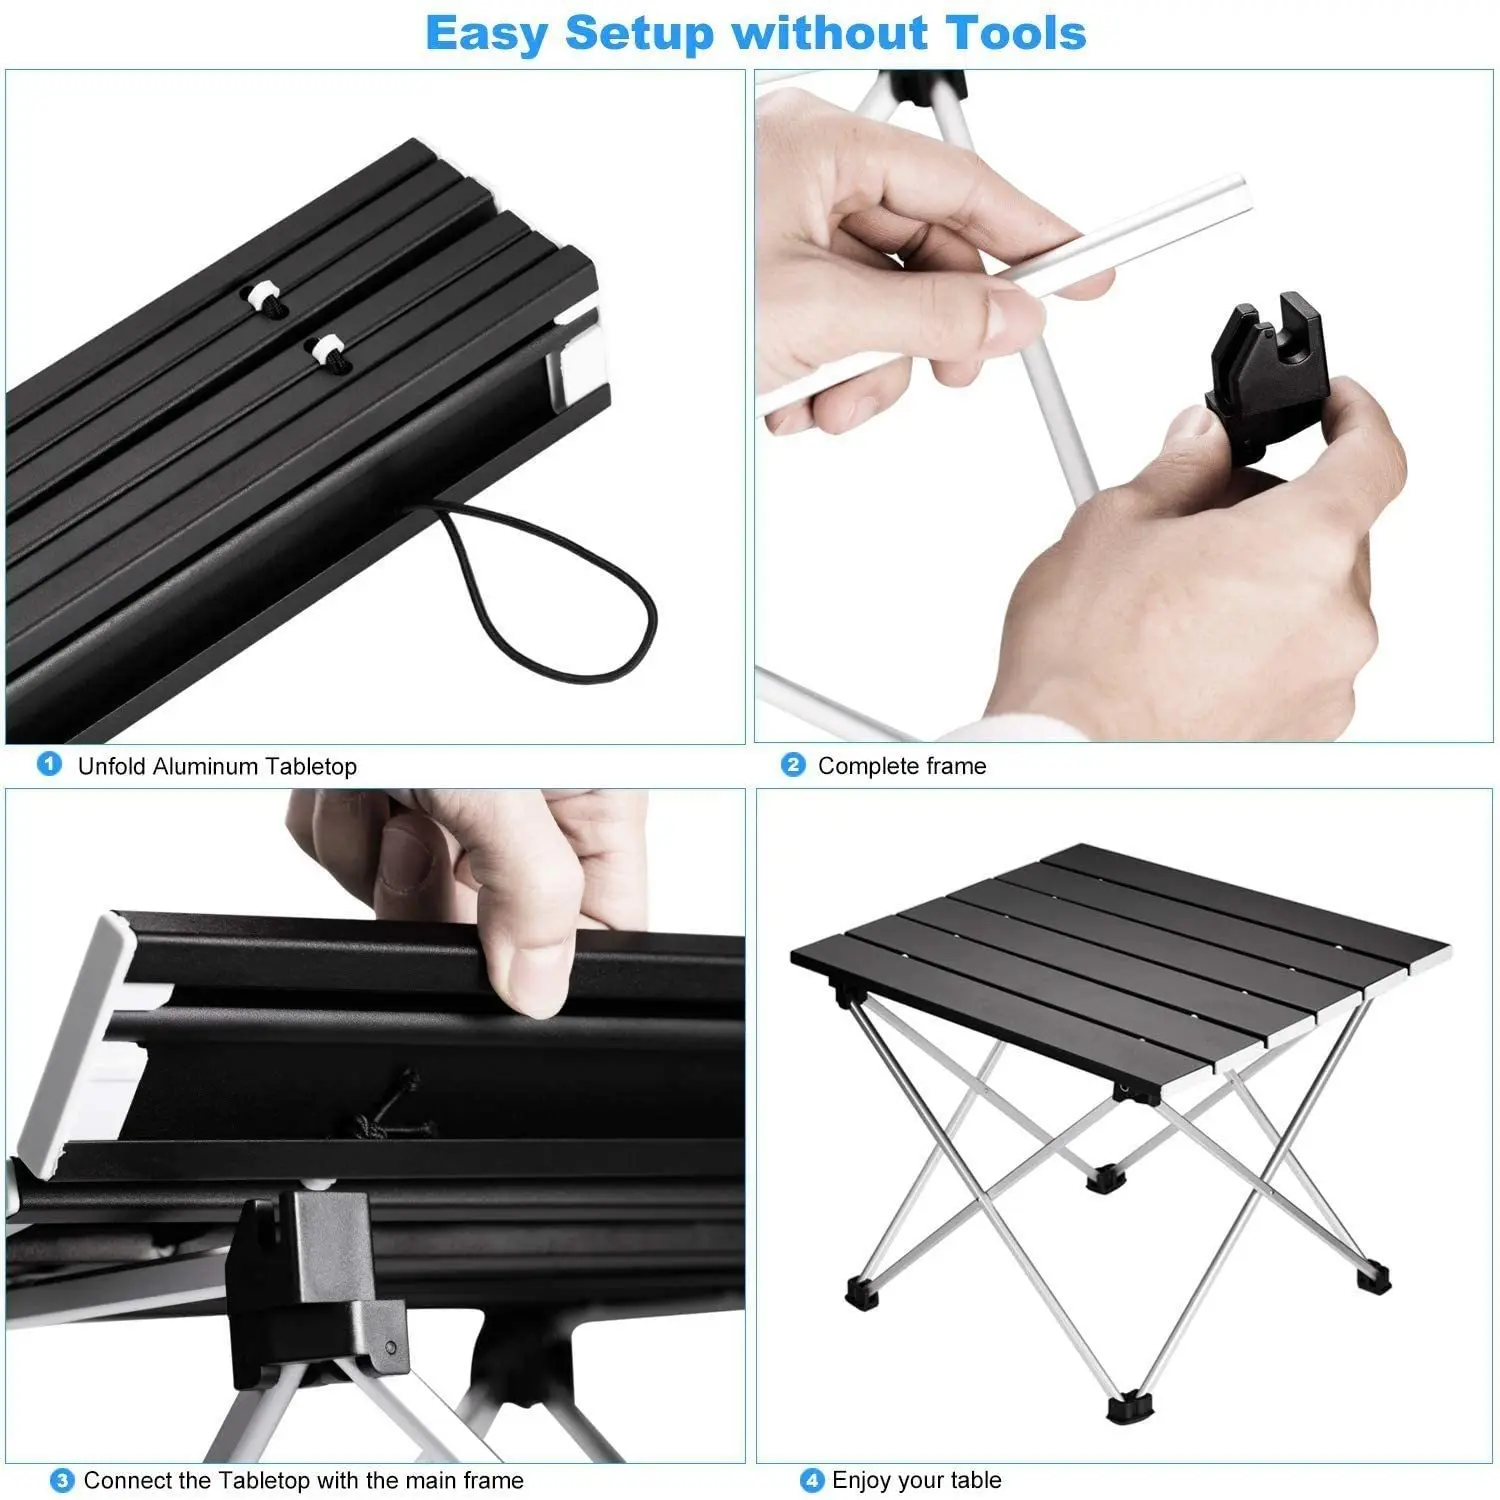 Ultralight Portable Folding Camping Table Foldable Outdoor Dinner Desk High Strength Aluminum Alloy For Garden Party Picnic BBQ enlarge